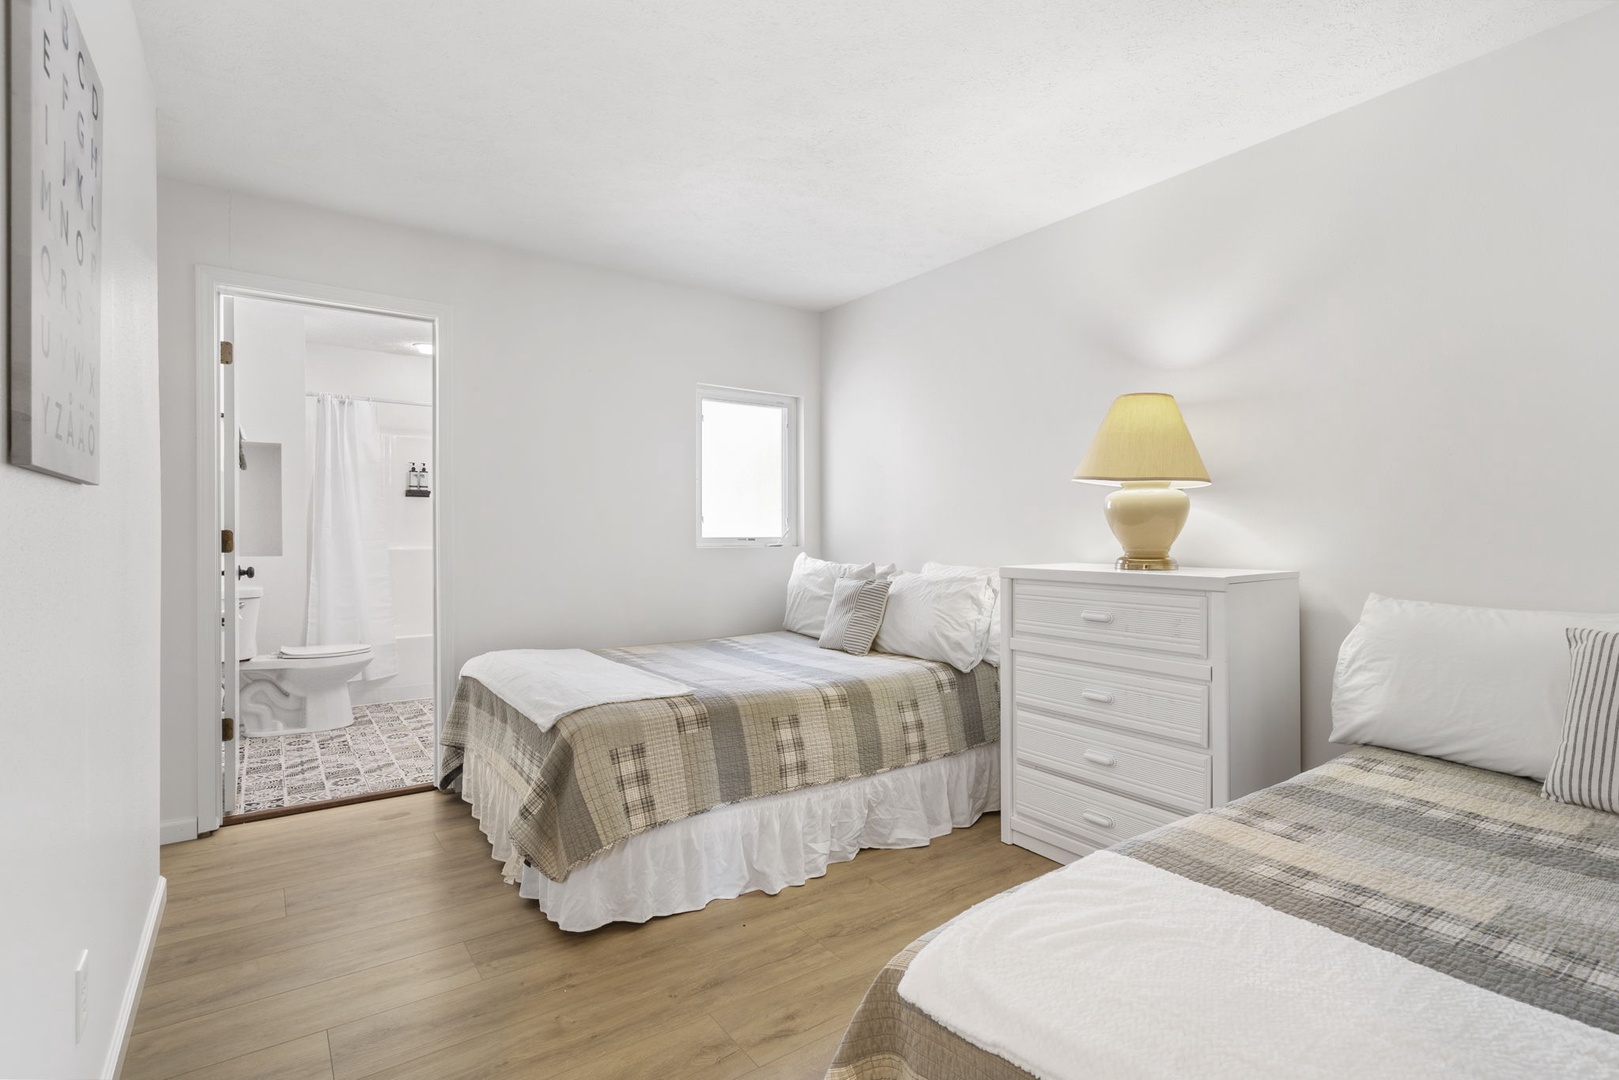 Unit 41: This 2nd floor suite includes a pair of full beds & private en suite